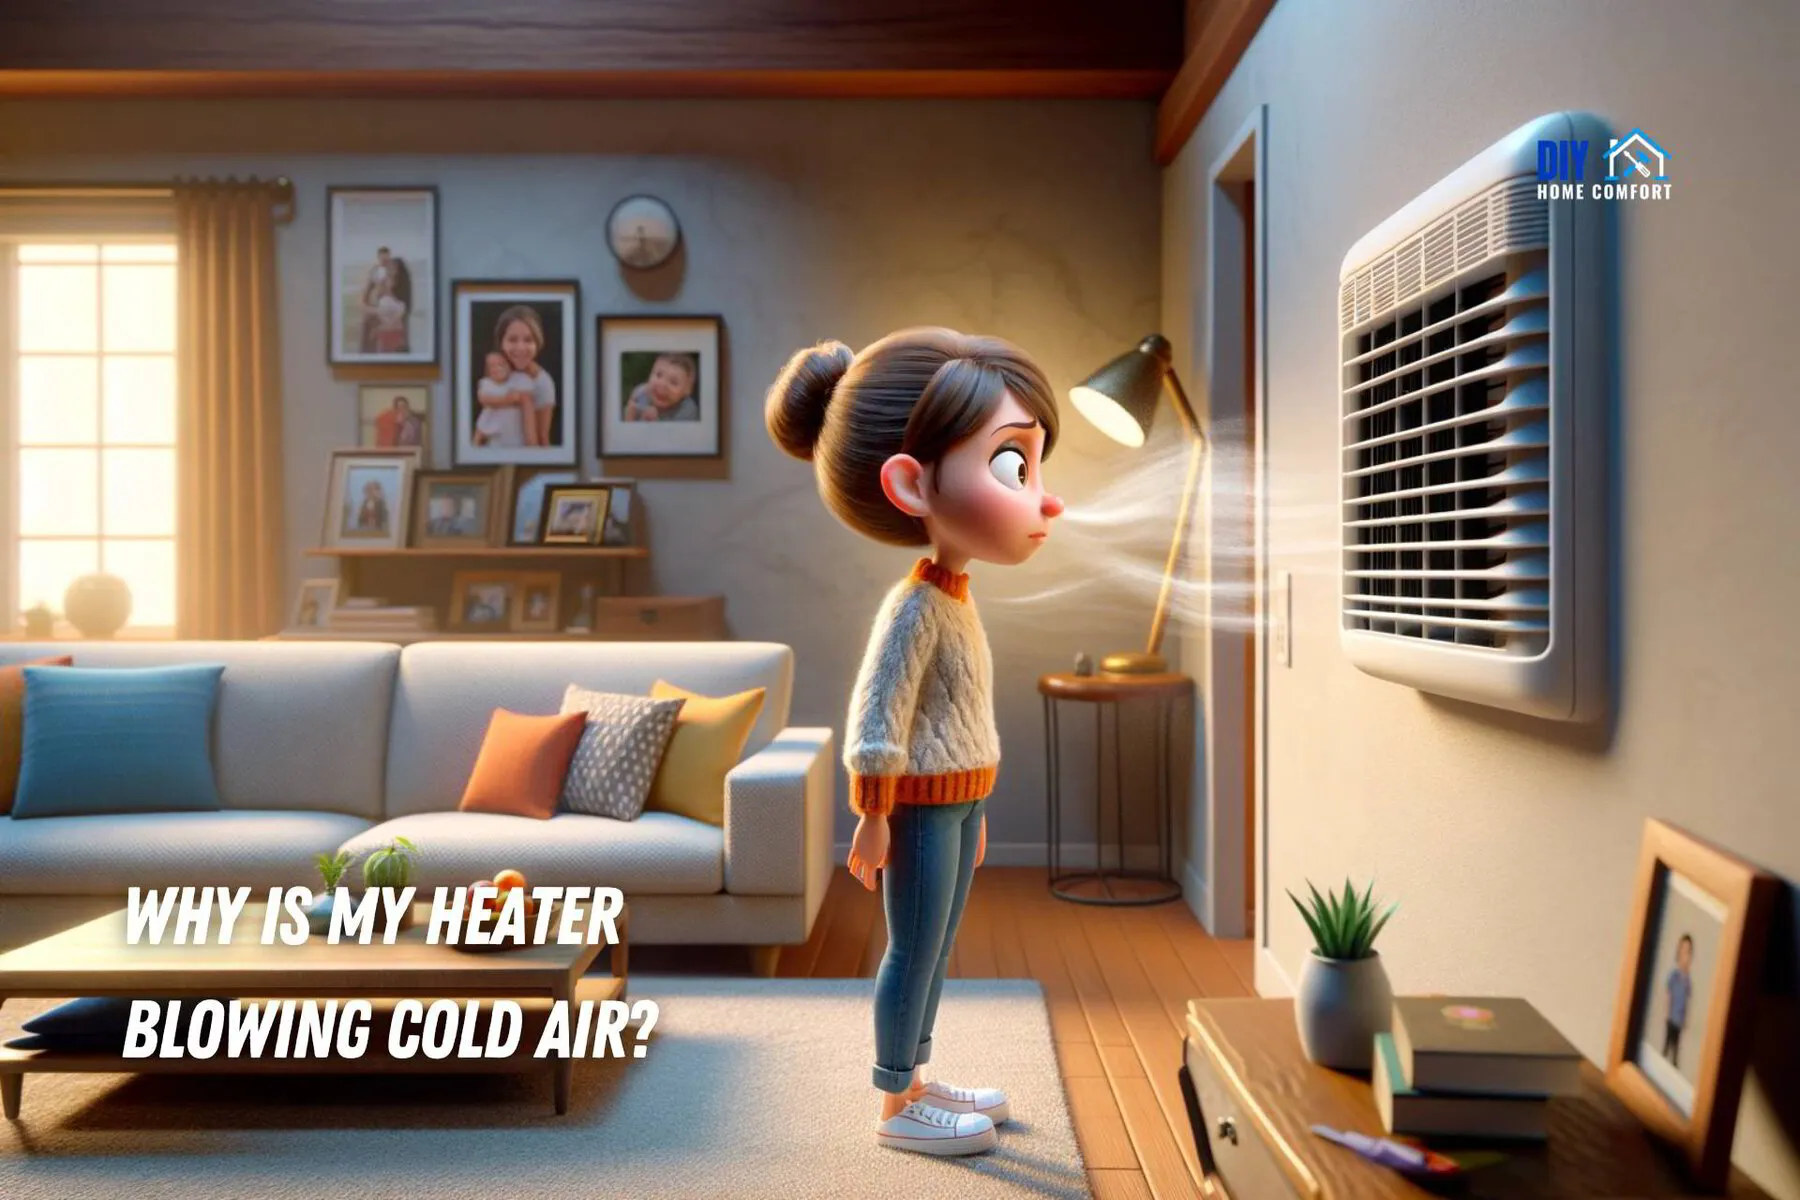 HVAC Insights: Why Is My Heater Blowing Cold Air?  | DIY Home Comfort